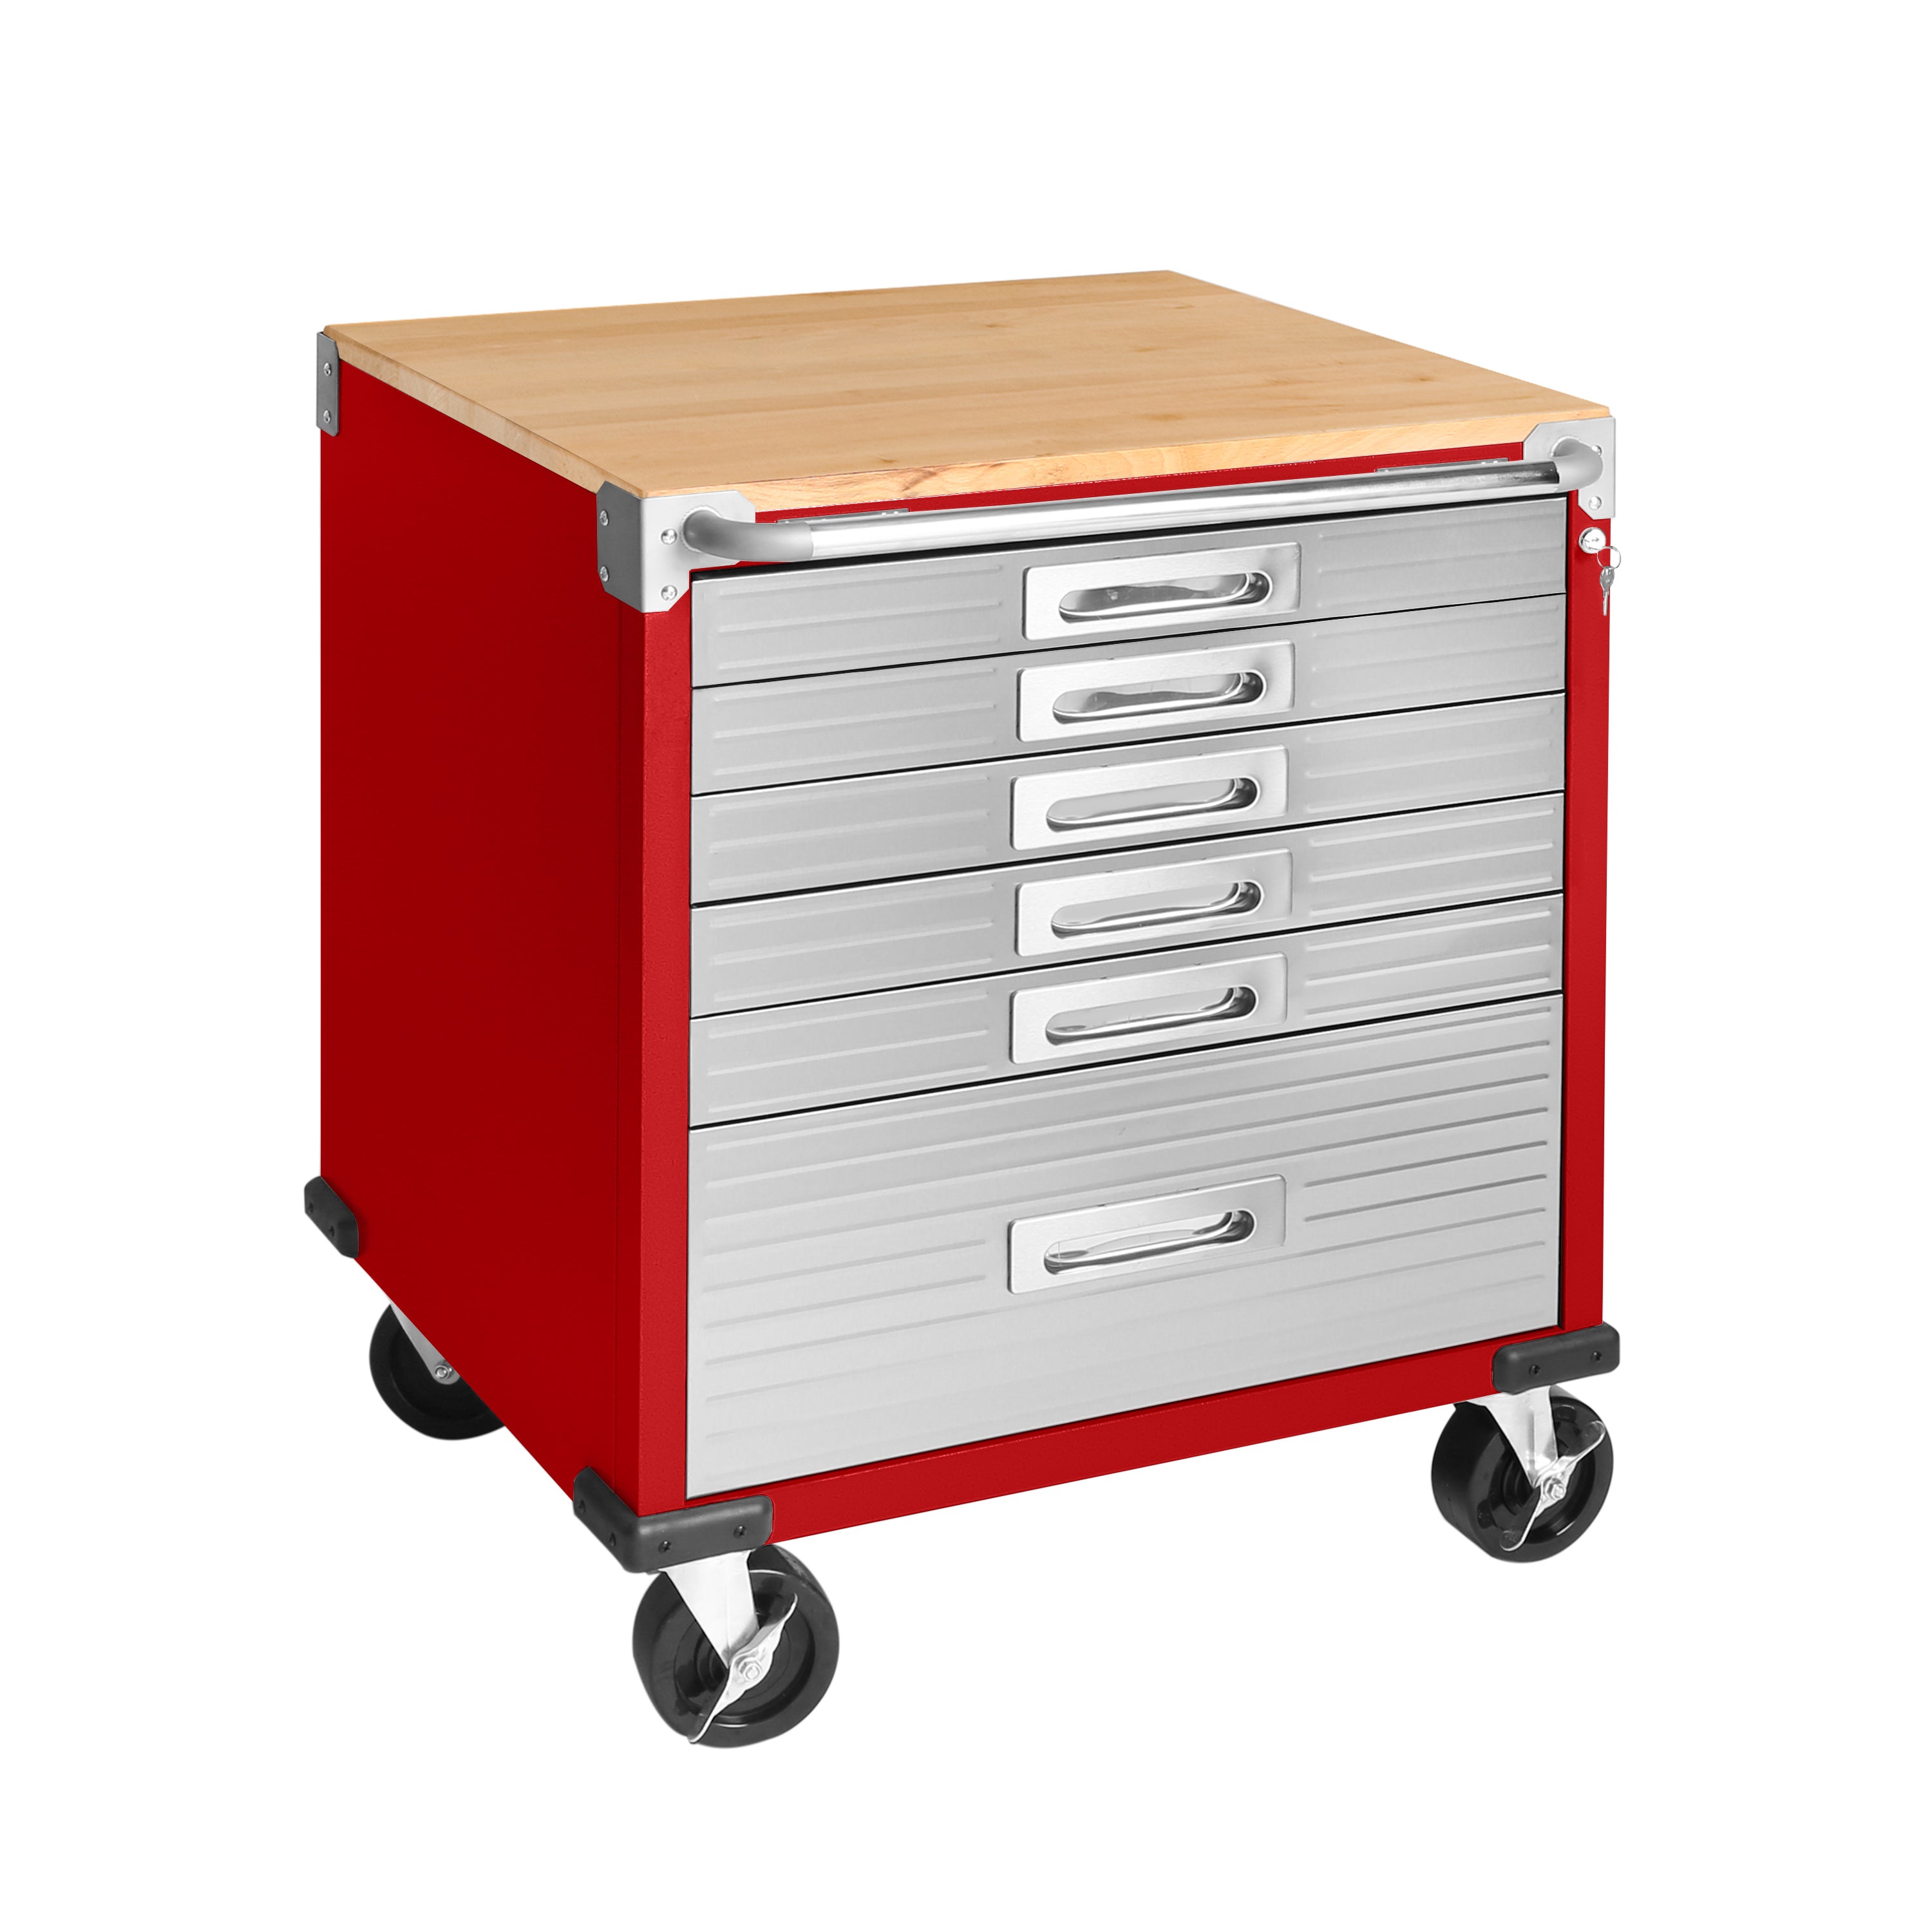  Seville Classics UltraHD Rolling Storage Cabinet with Drawers  (UHD20205B) : Tools & Home Improvement